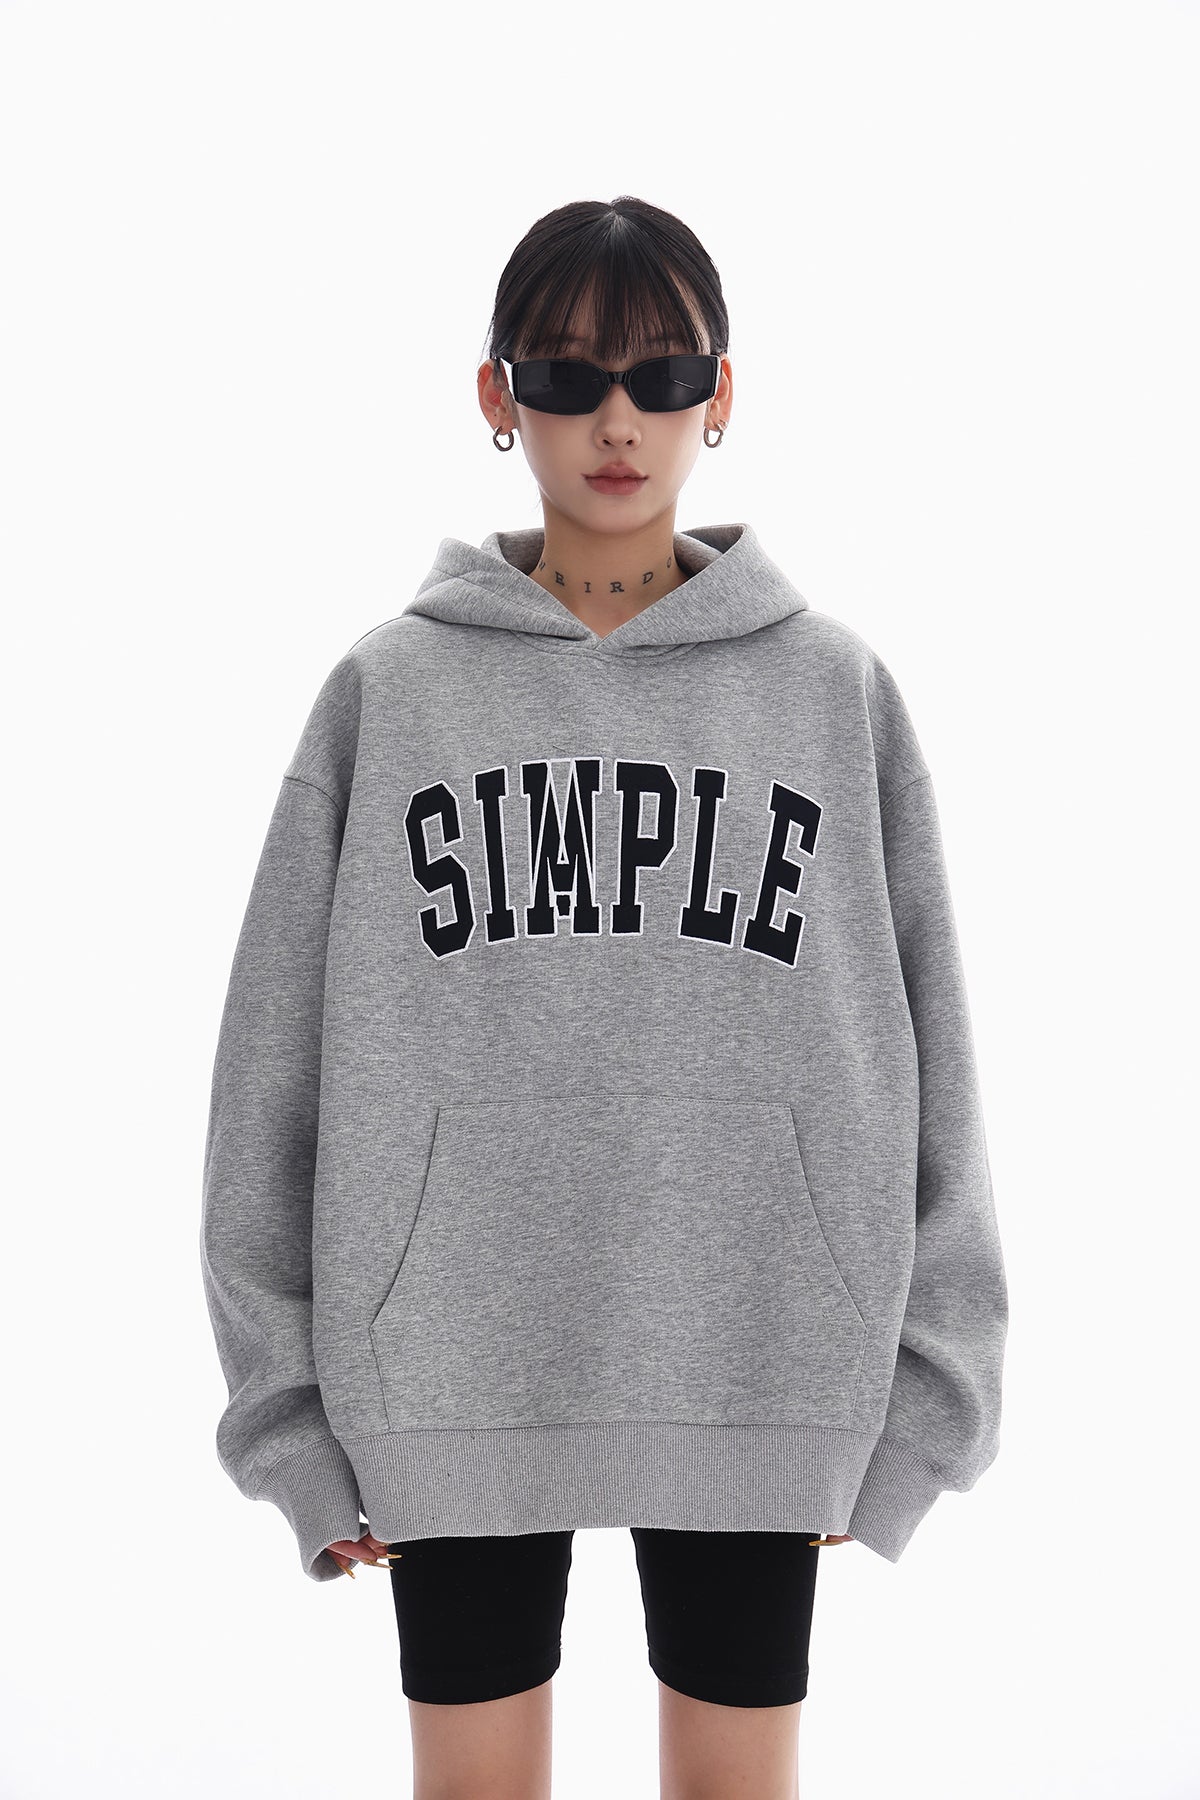 Textured hoodie with embroidered text